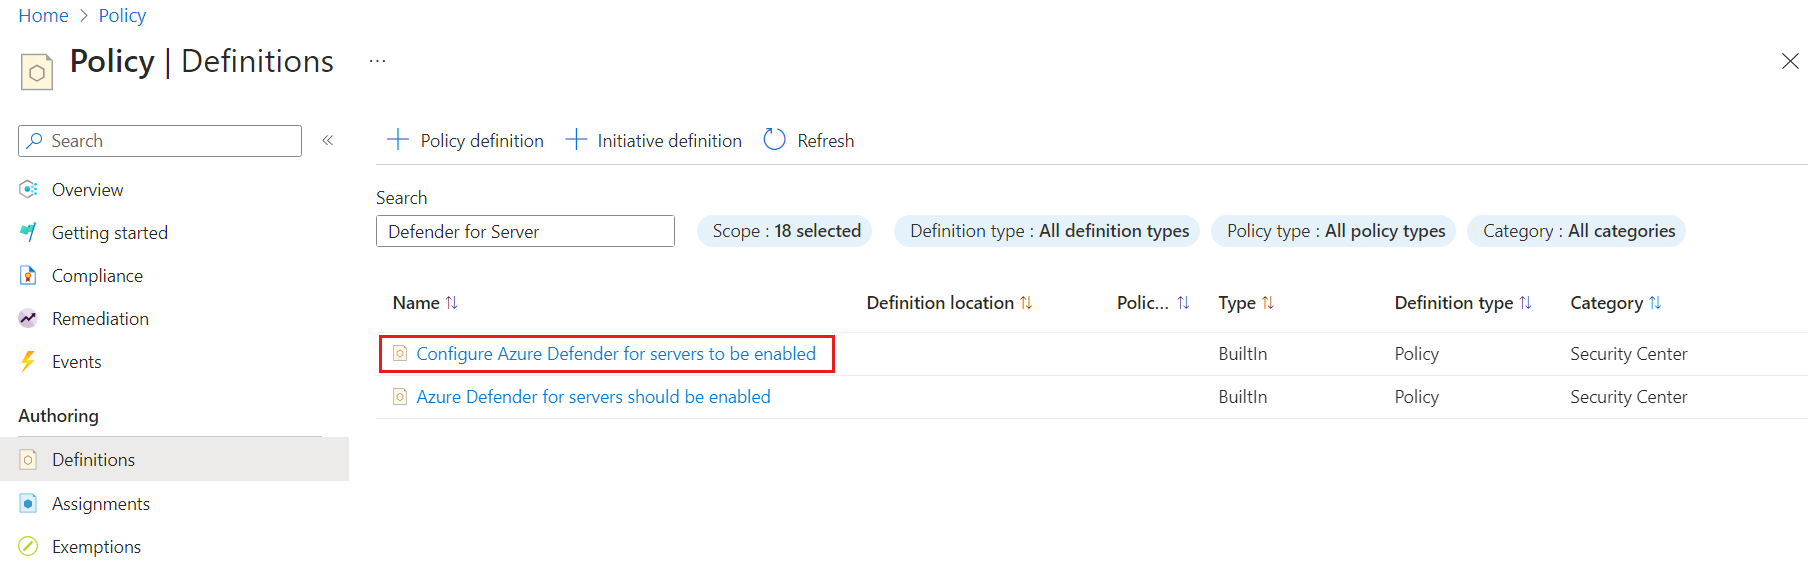 Screenshot that shows the Configure Azure Defender for Servers to be enabled policy definition.